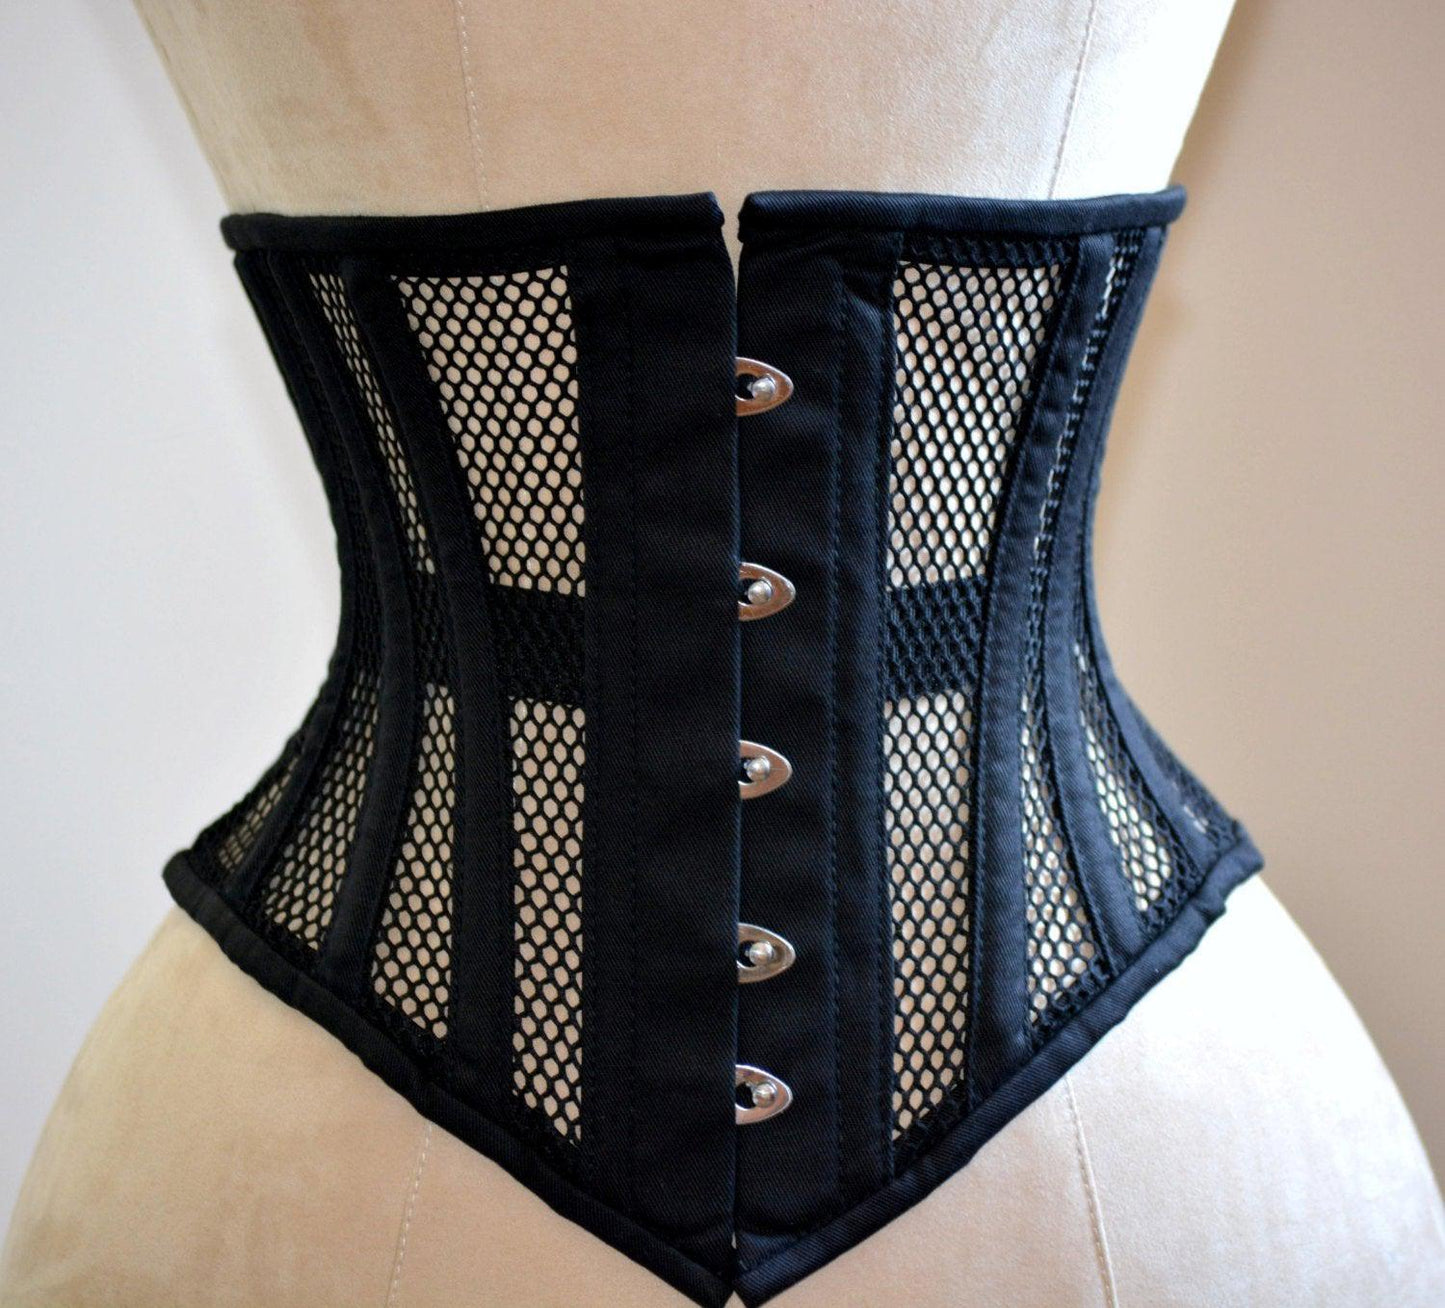 Real Double Row Steel Boned Underbust Corset From Real Brown Suede